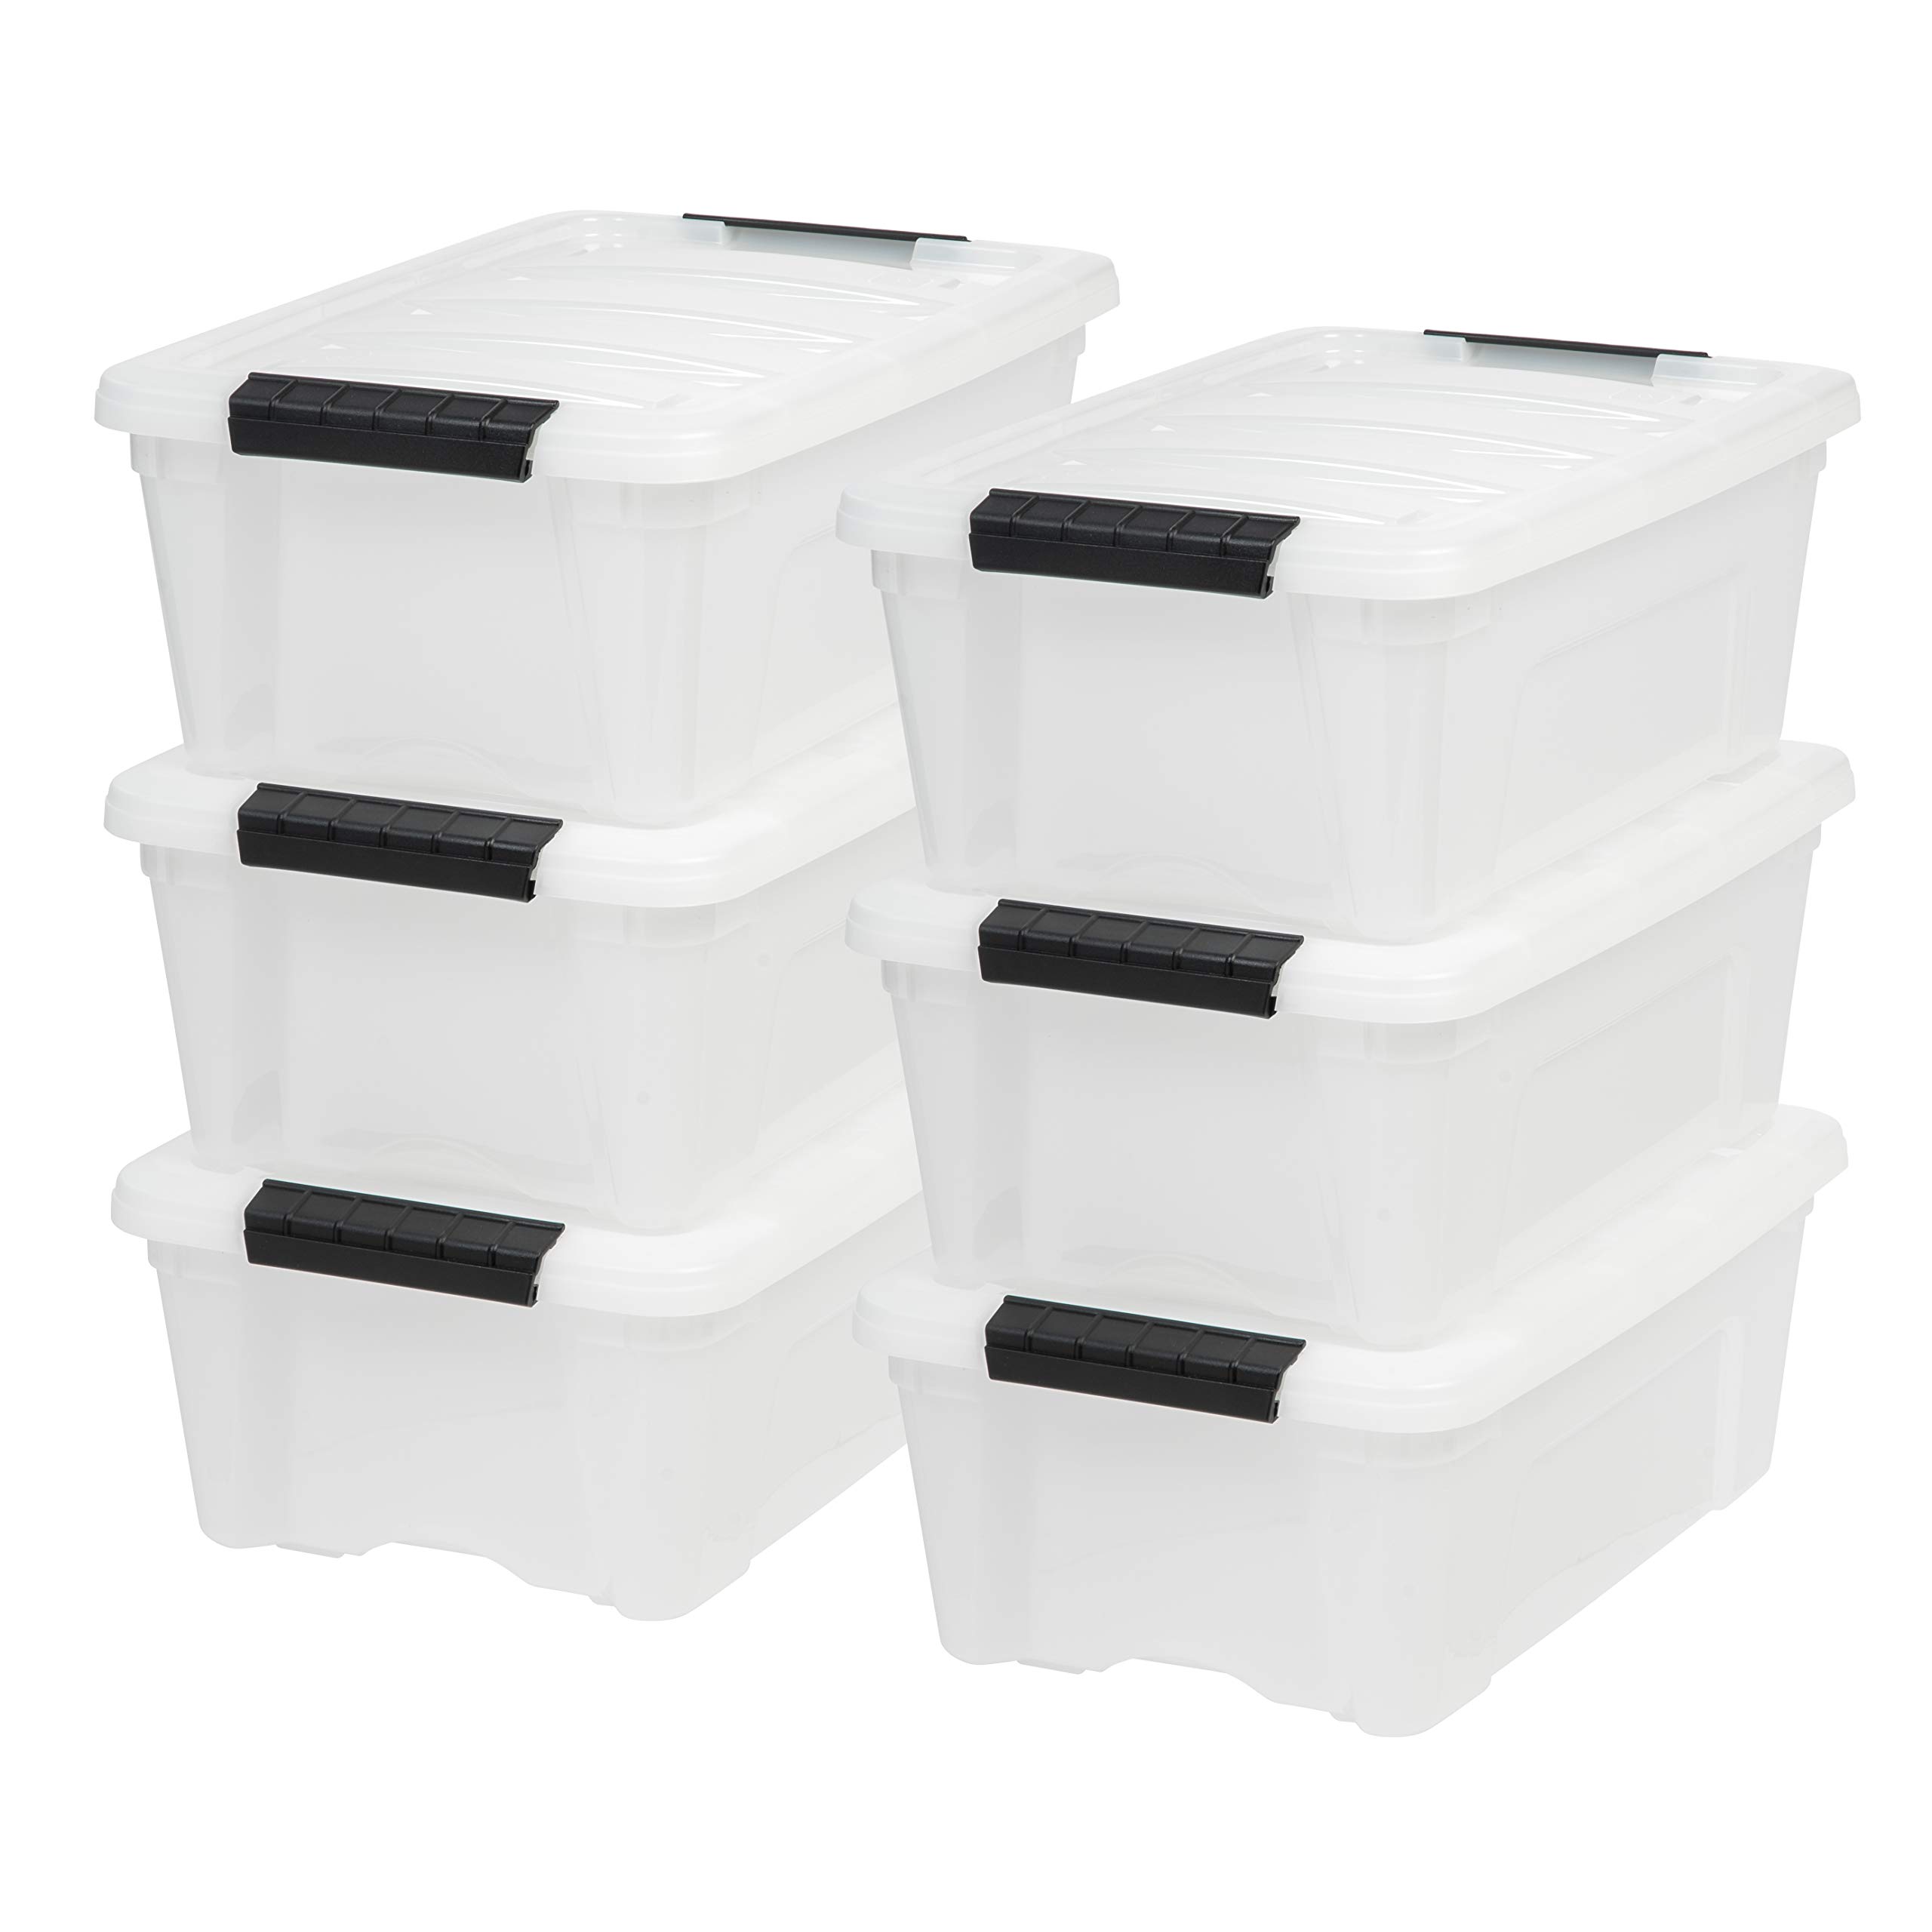 Bin stòraidh plastaig Tote Latching Buckles Lid Stackable Container Organising Home Decor